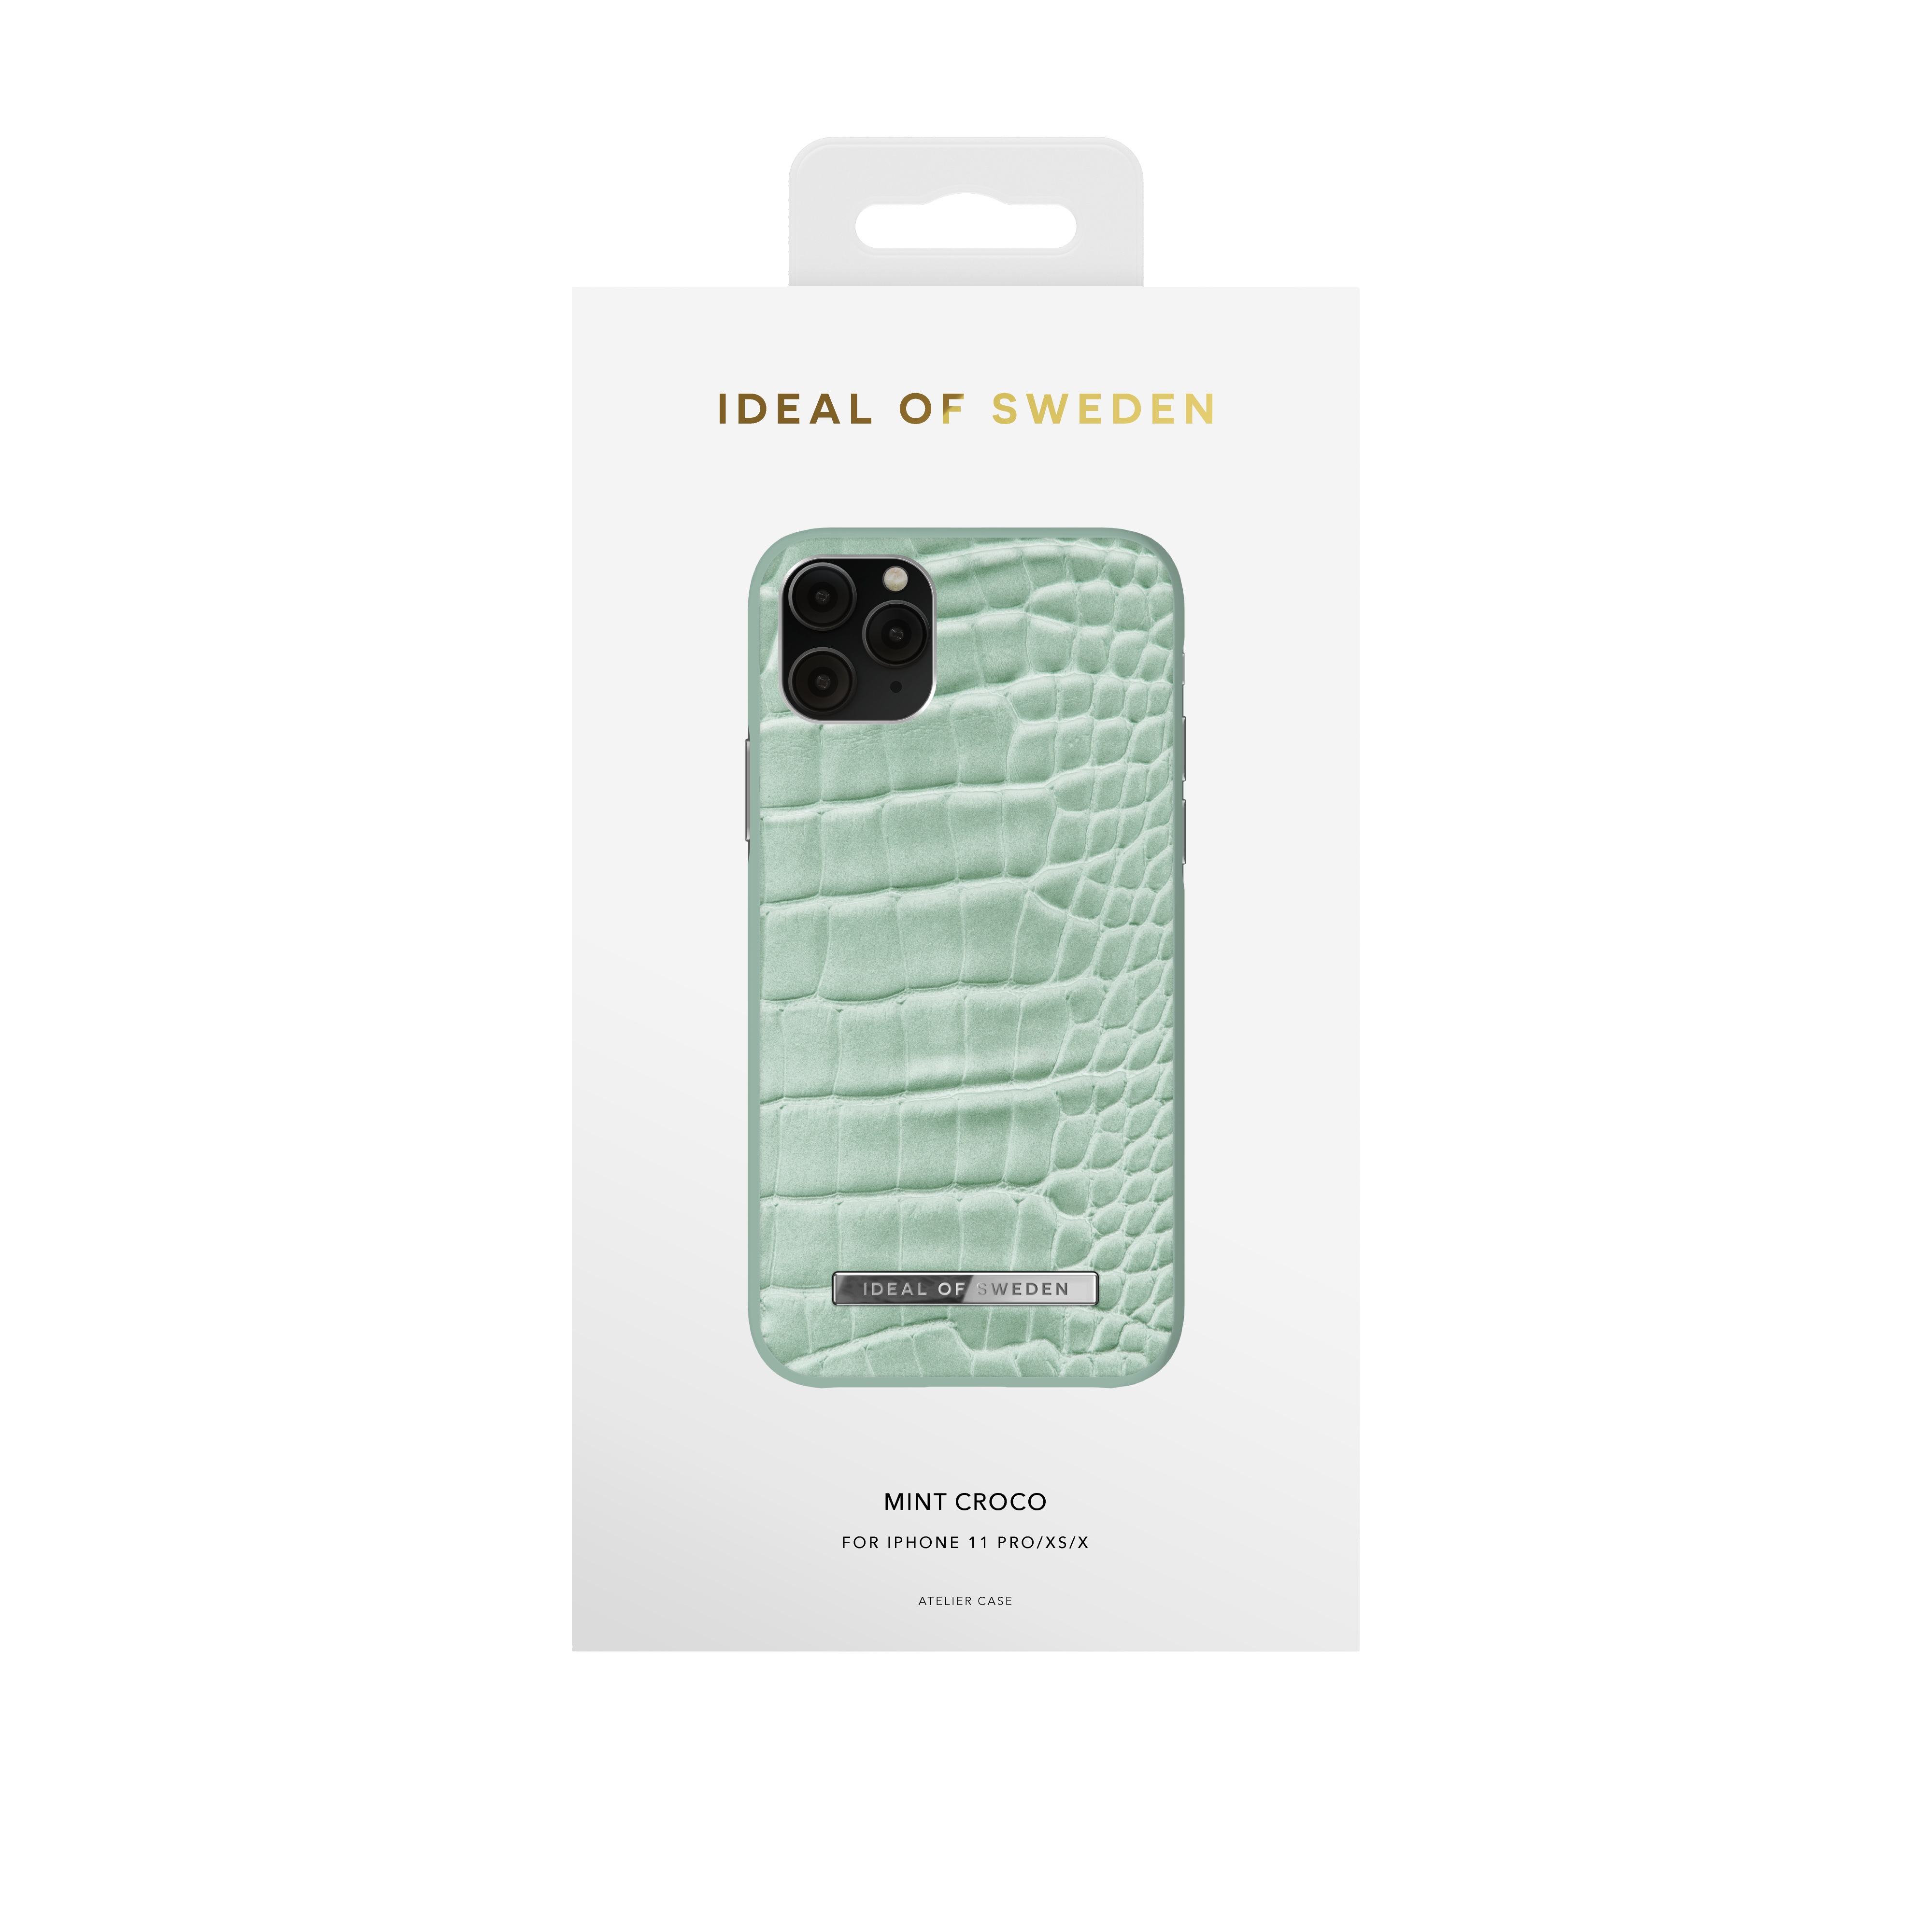 IDEAL OF SWEDEN IDACSS21-I1958-261, iPhone Apple, iPhone Pro, Backcover, iPhone XS, X, Mint Croco 11